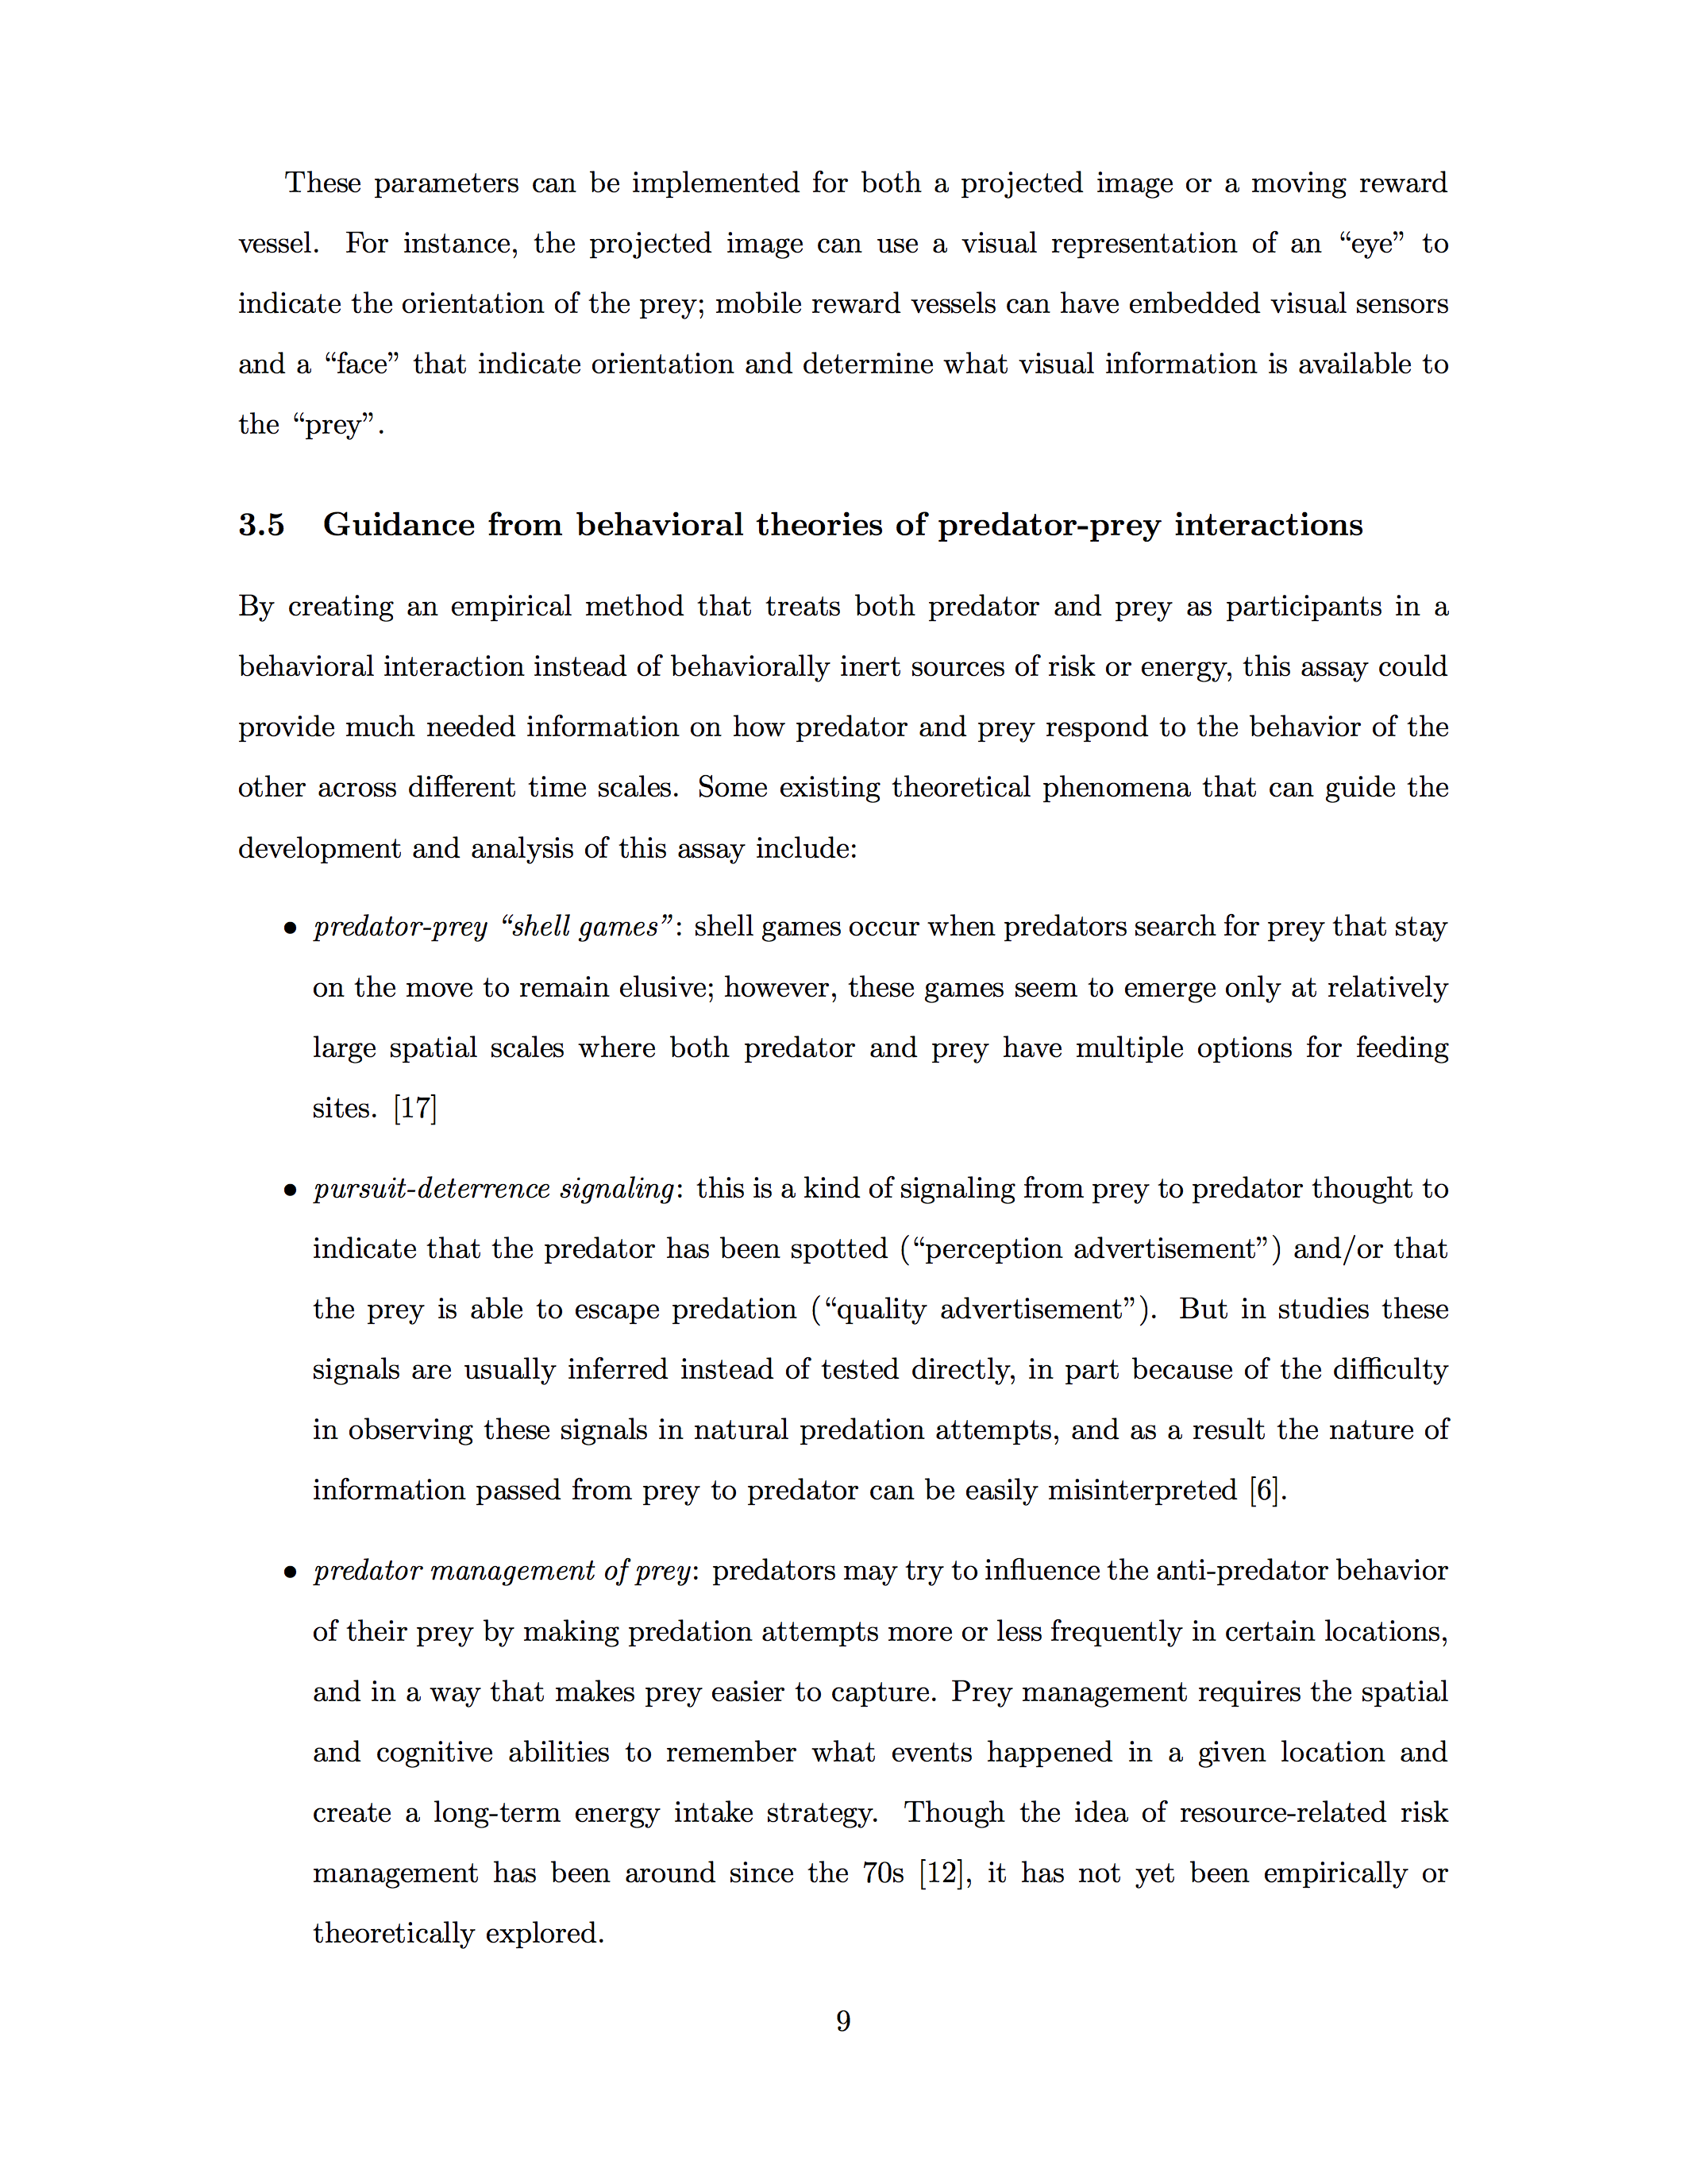 PhD thesis proposal, page 09